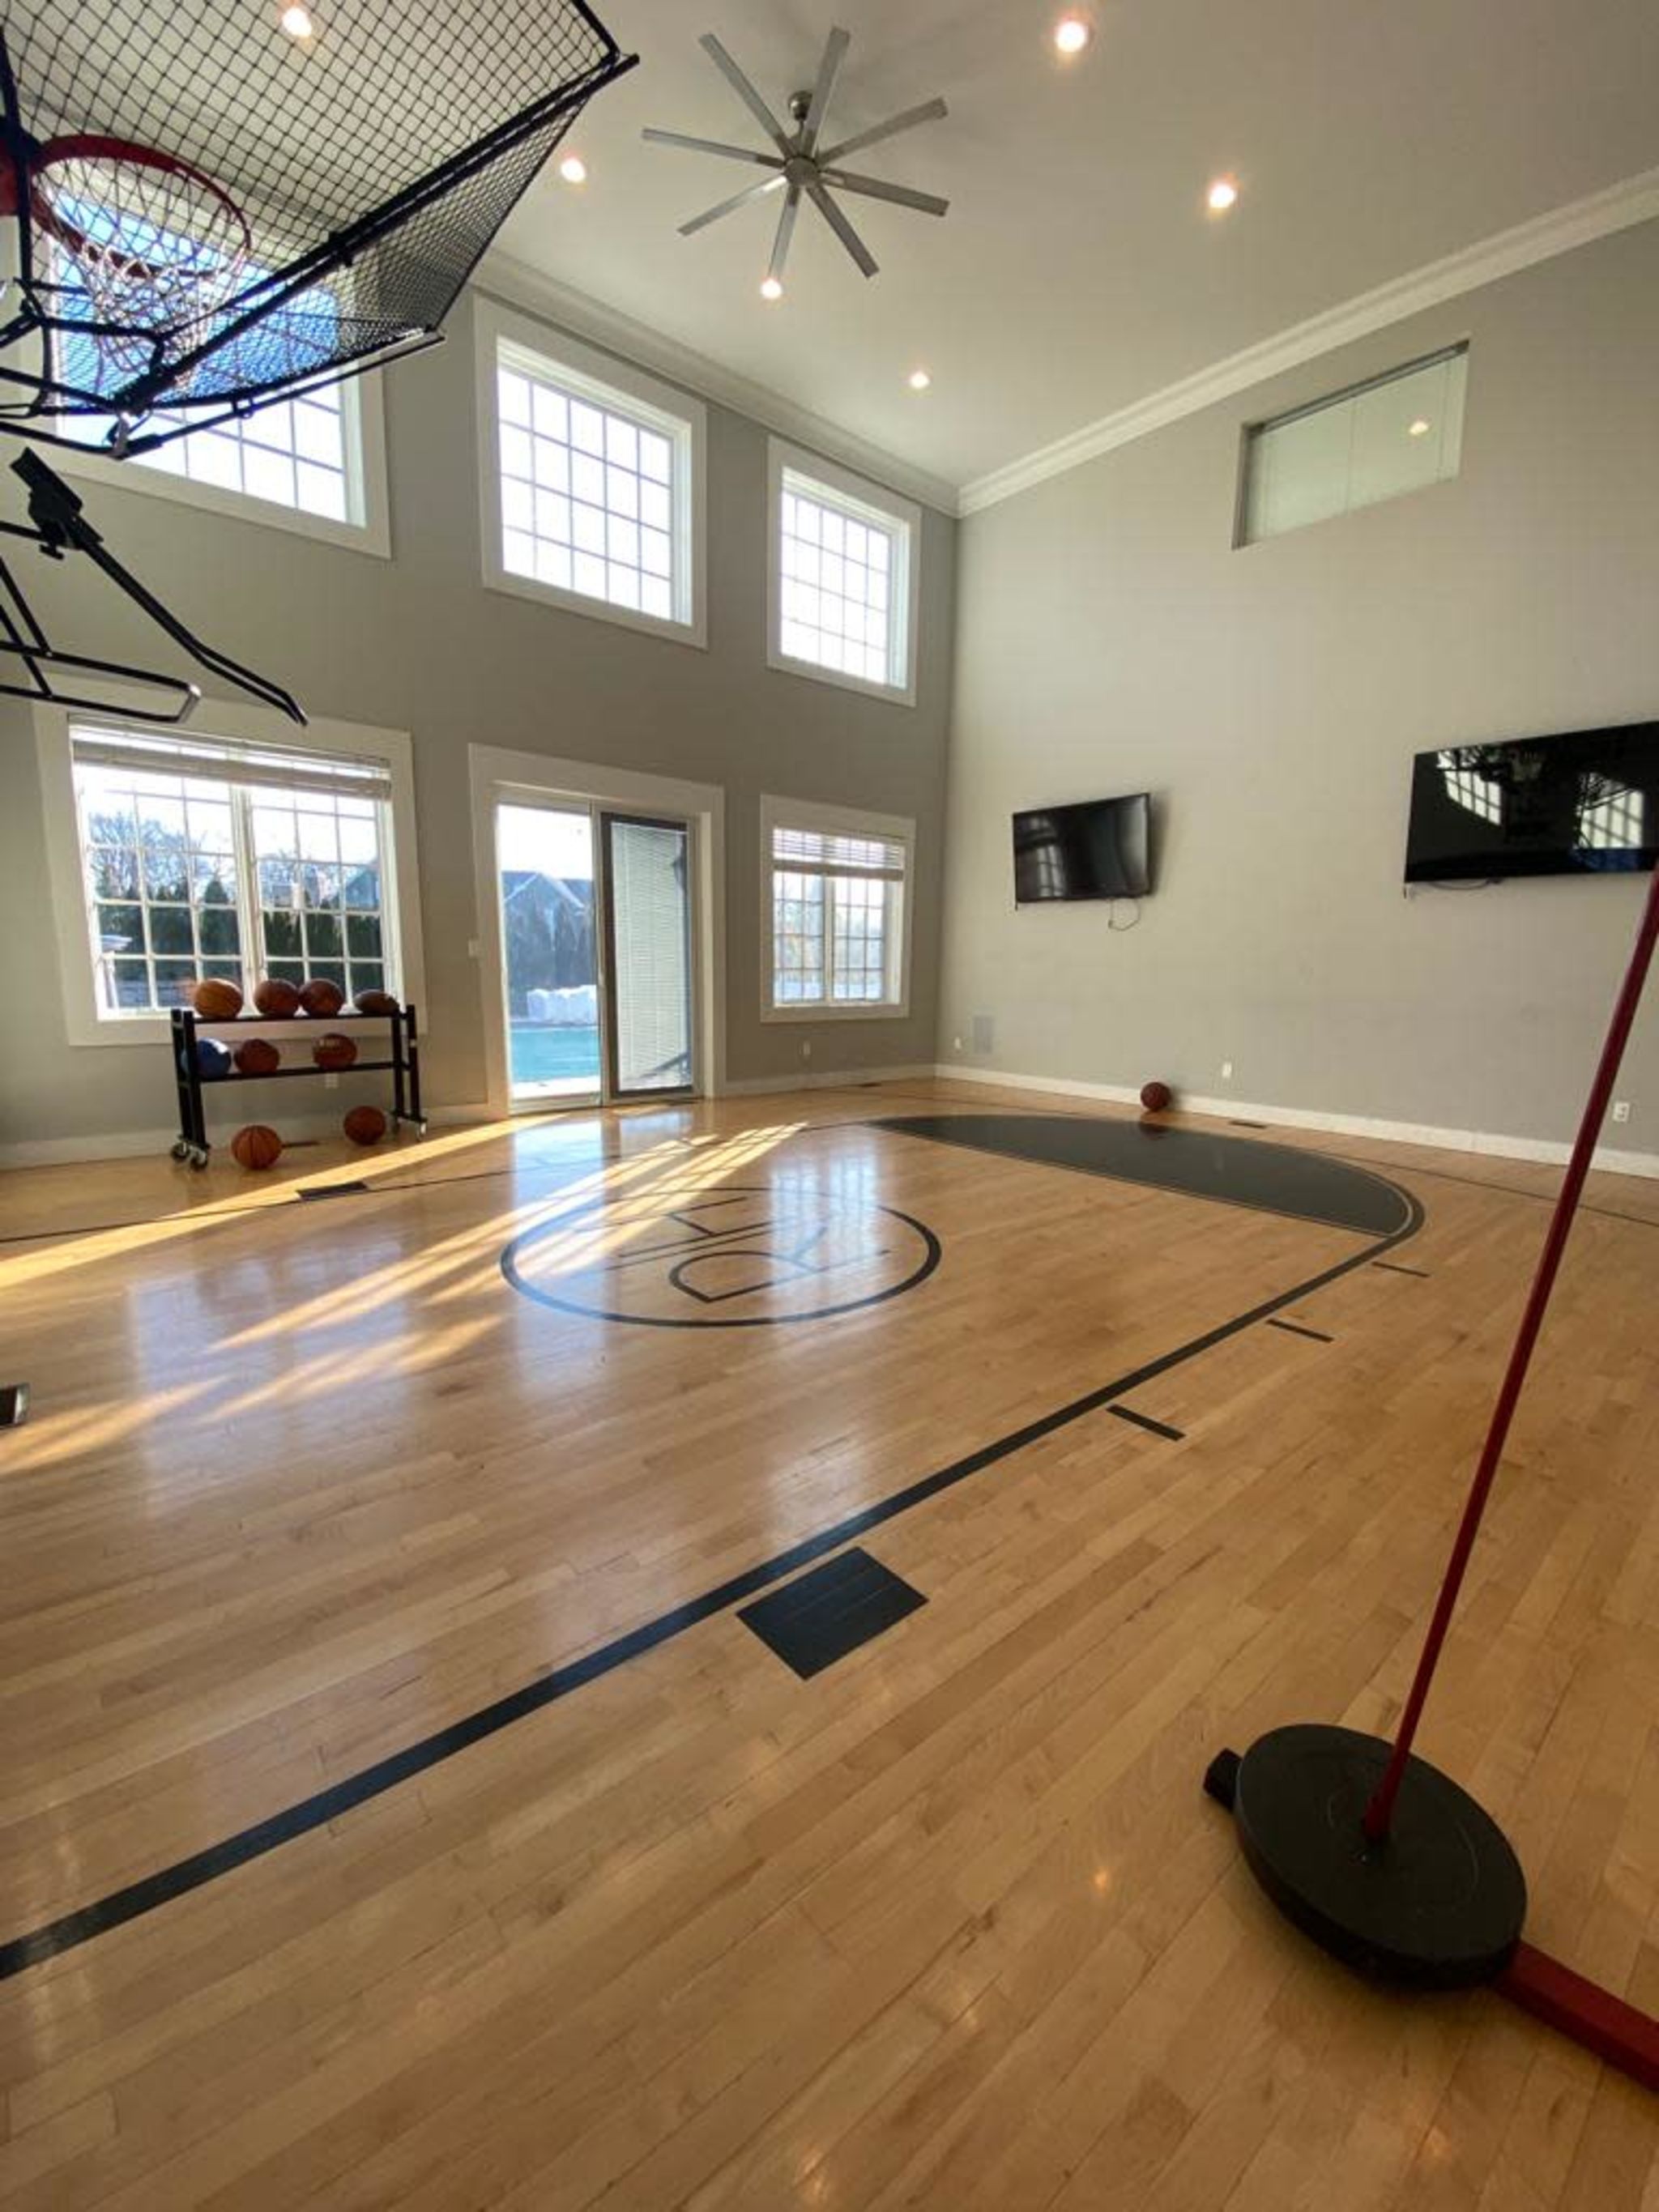 The Big Splurge: Indoor Basketball Courts For True Hoops 40% OFF